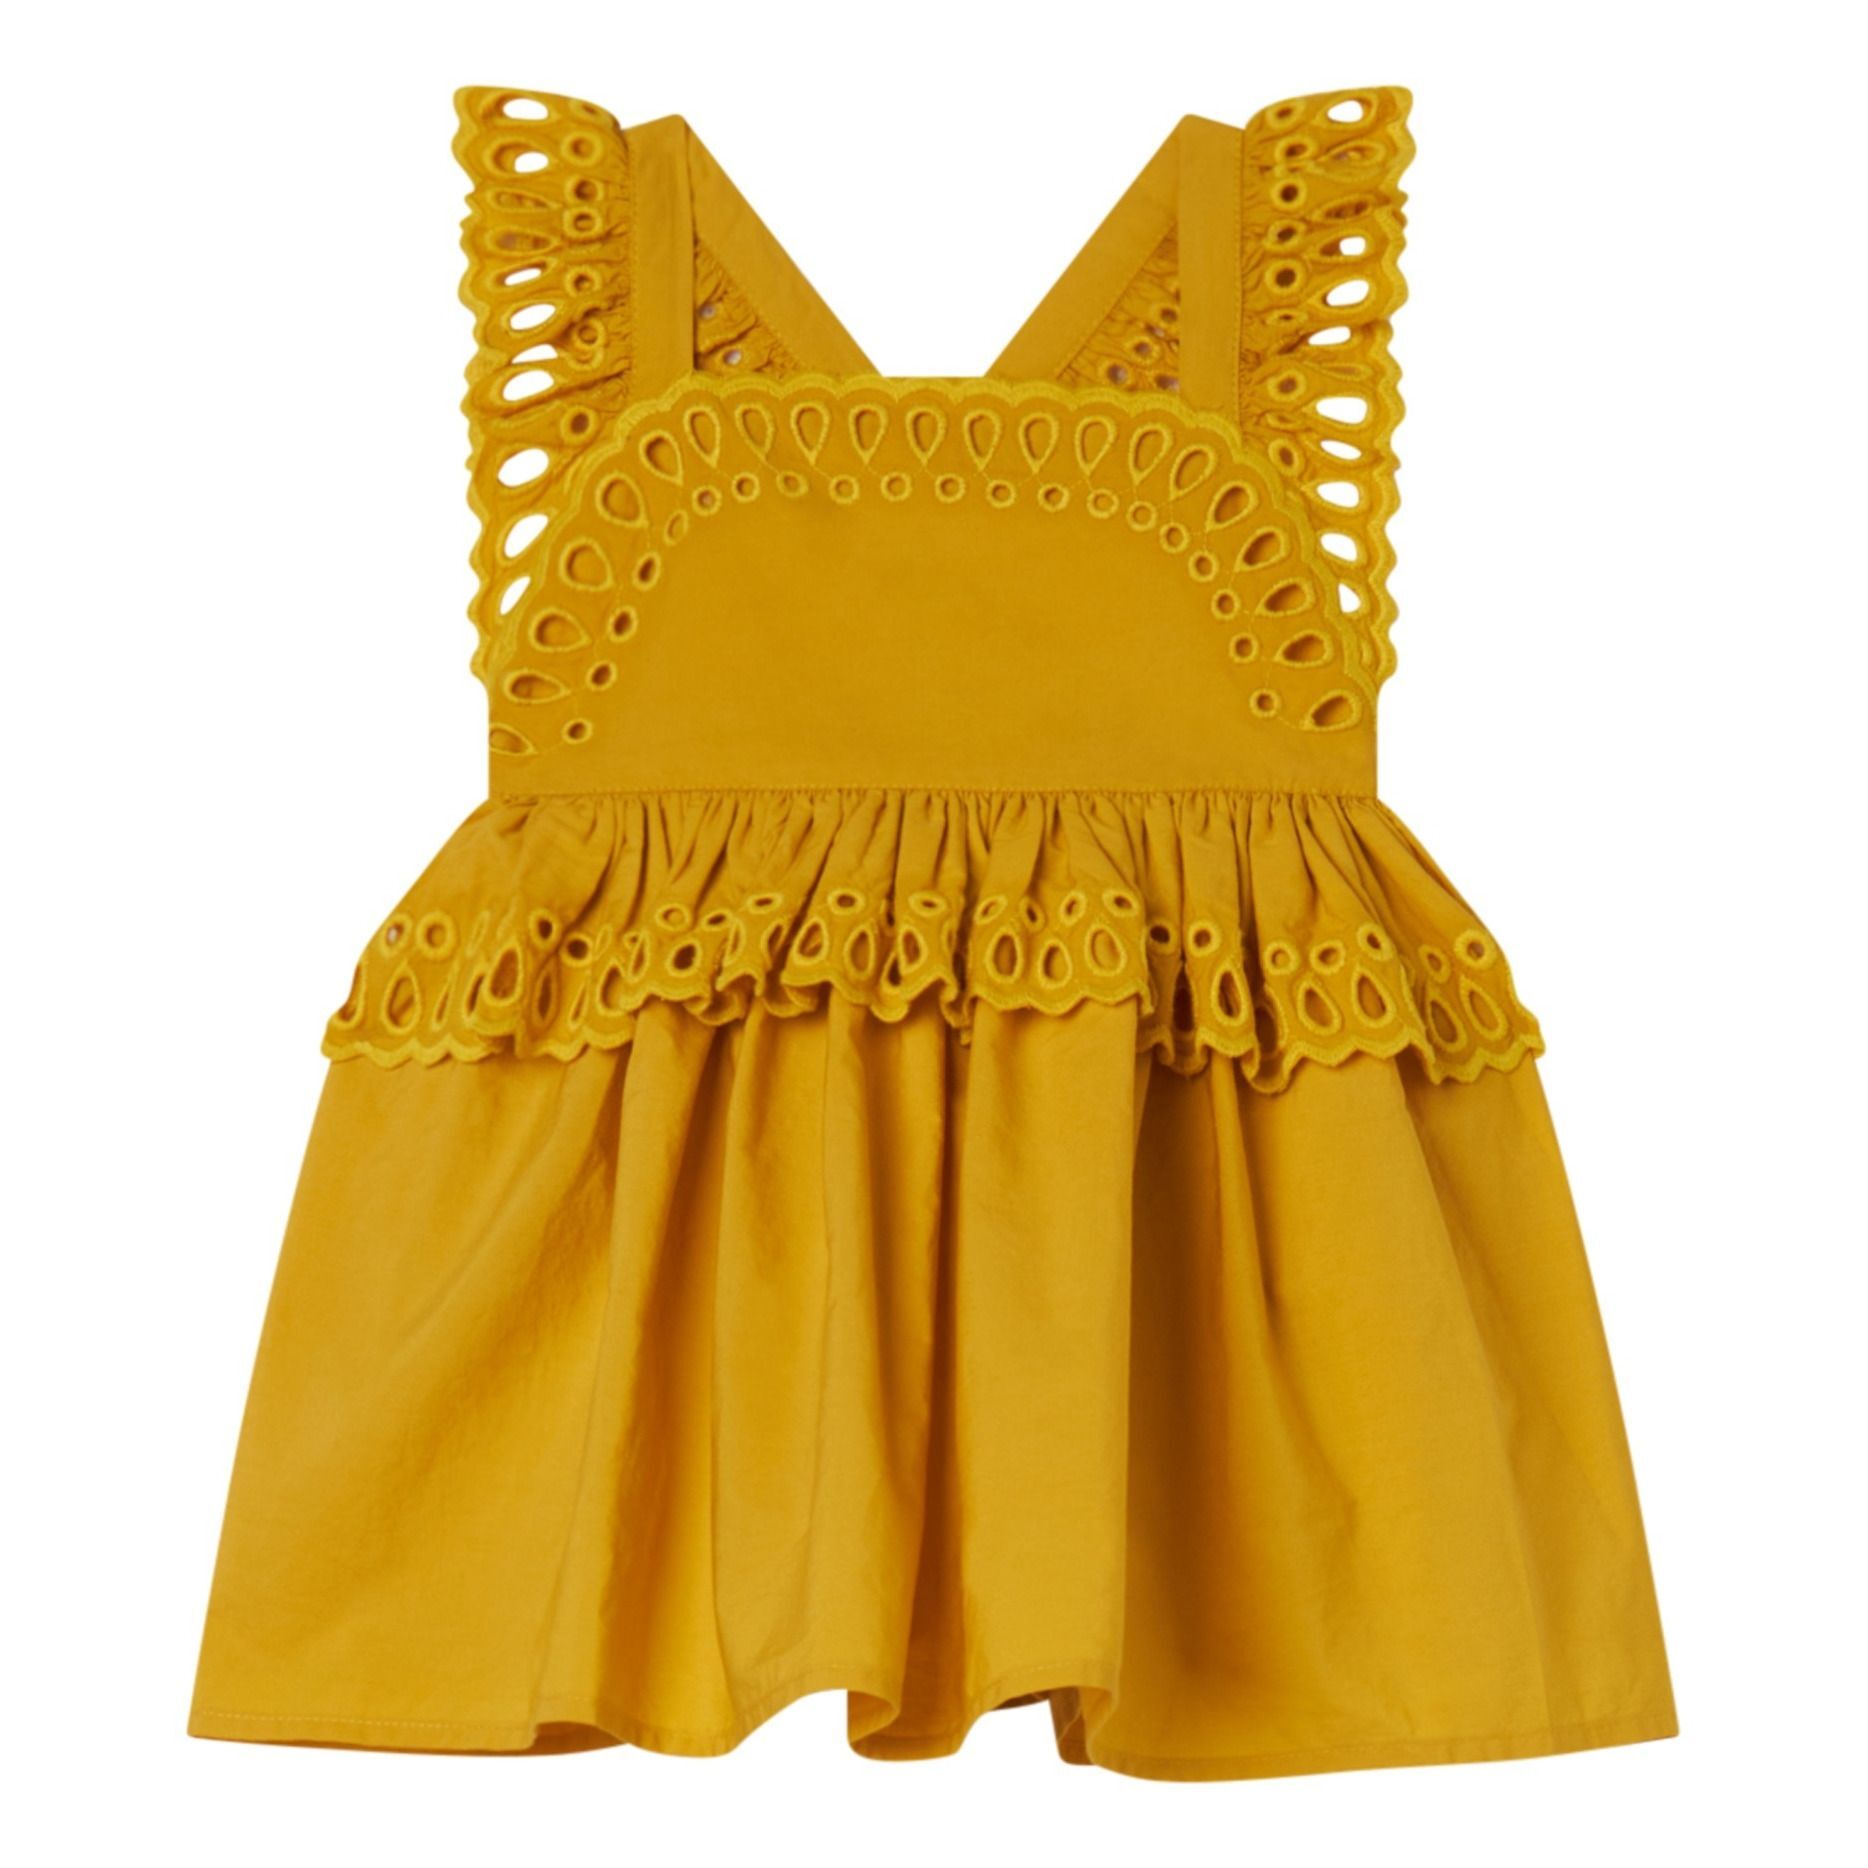 Stella McCartney Kids Broderie Anglaise Baby Dress Yellow 9 months Girl